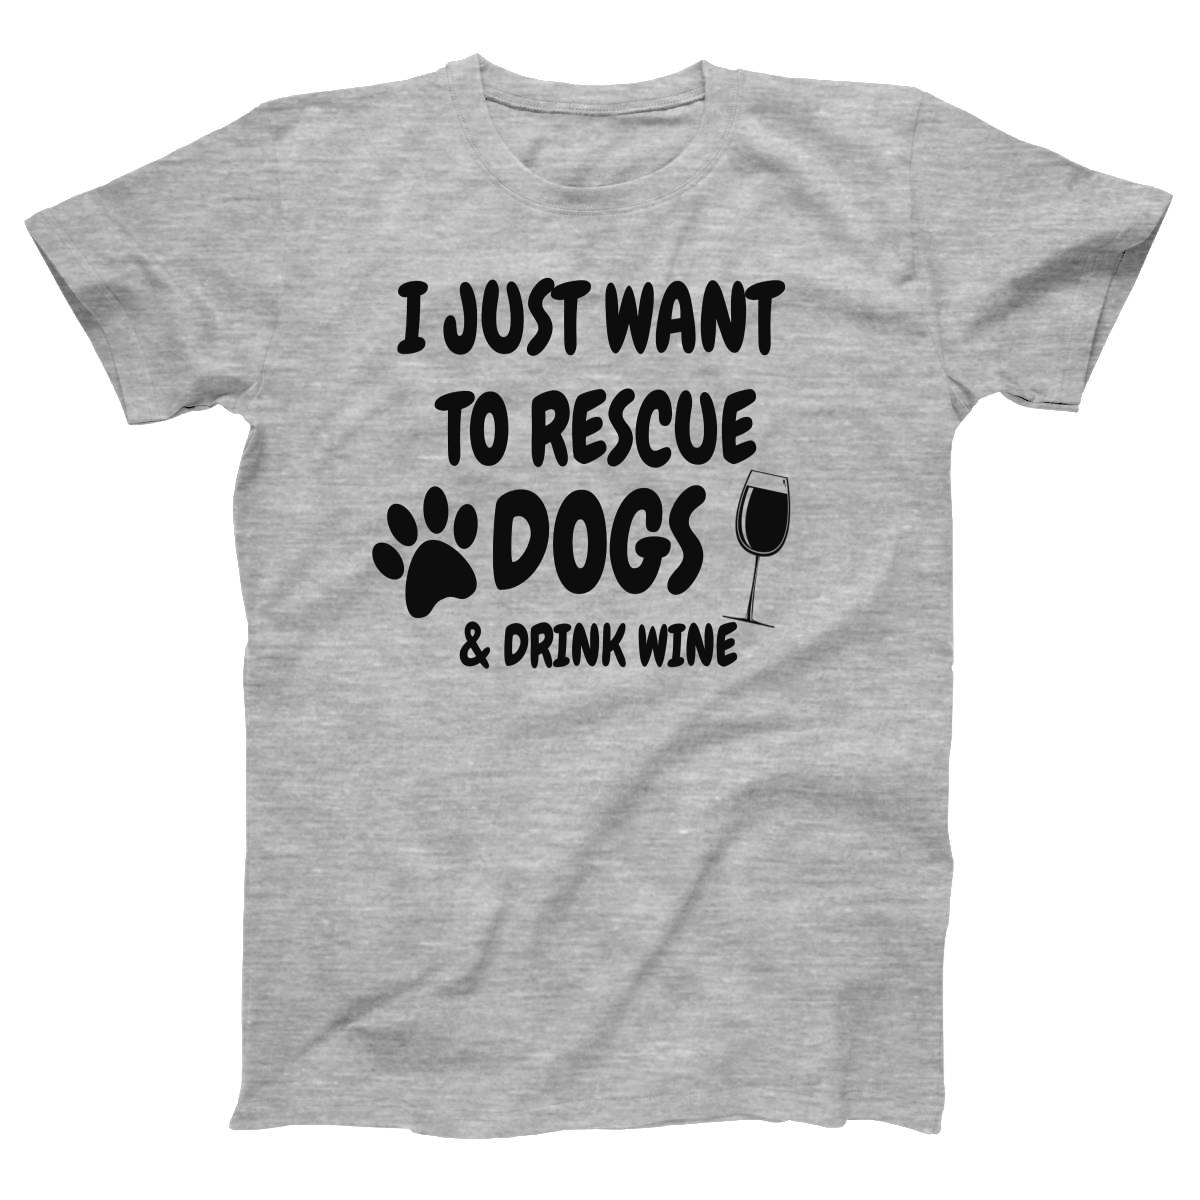 Dogs and Drink Wine Women's T-shirt | Gray